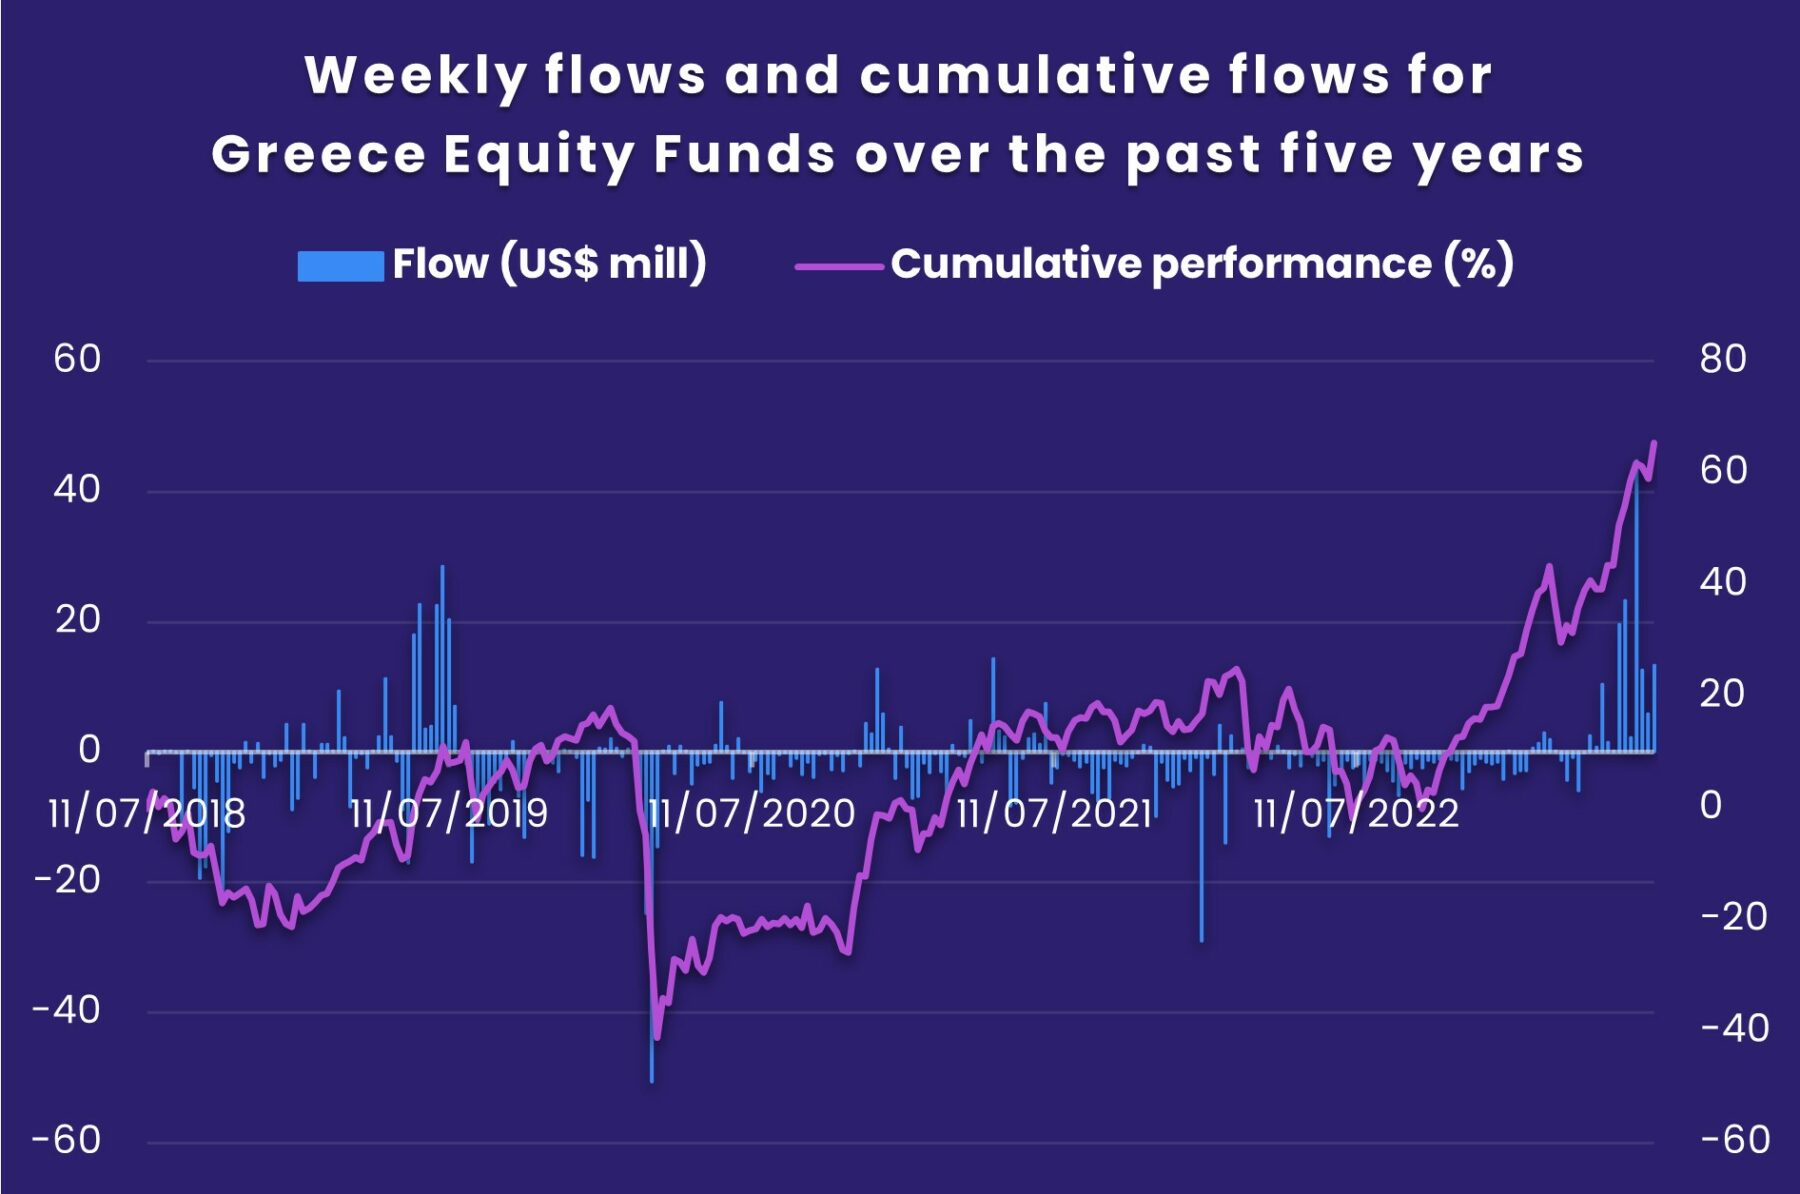 Image of a chart representing "Weekly flows and cumulative flows for Greece Equity Funds over the past five years"